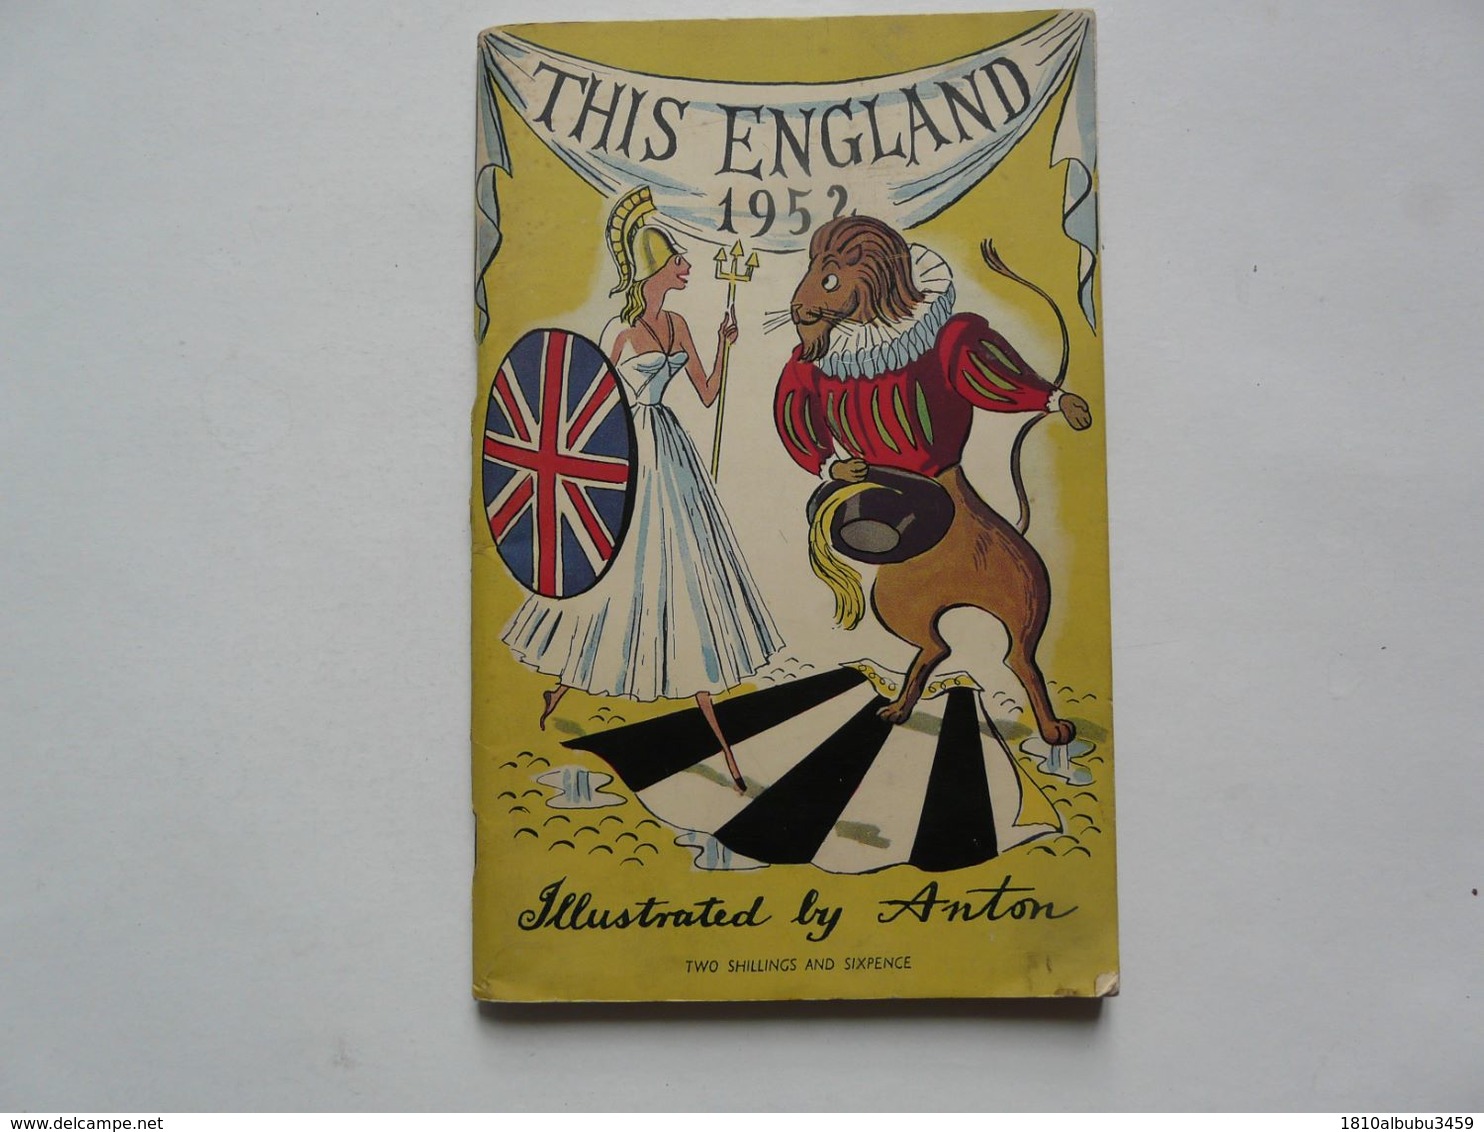 THIS ENGLAND 1952 - ILLUSTRATED BY ANTON - Ontwikkeling